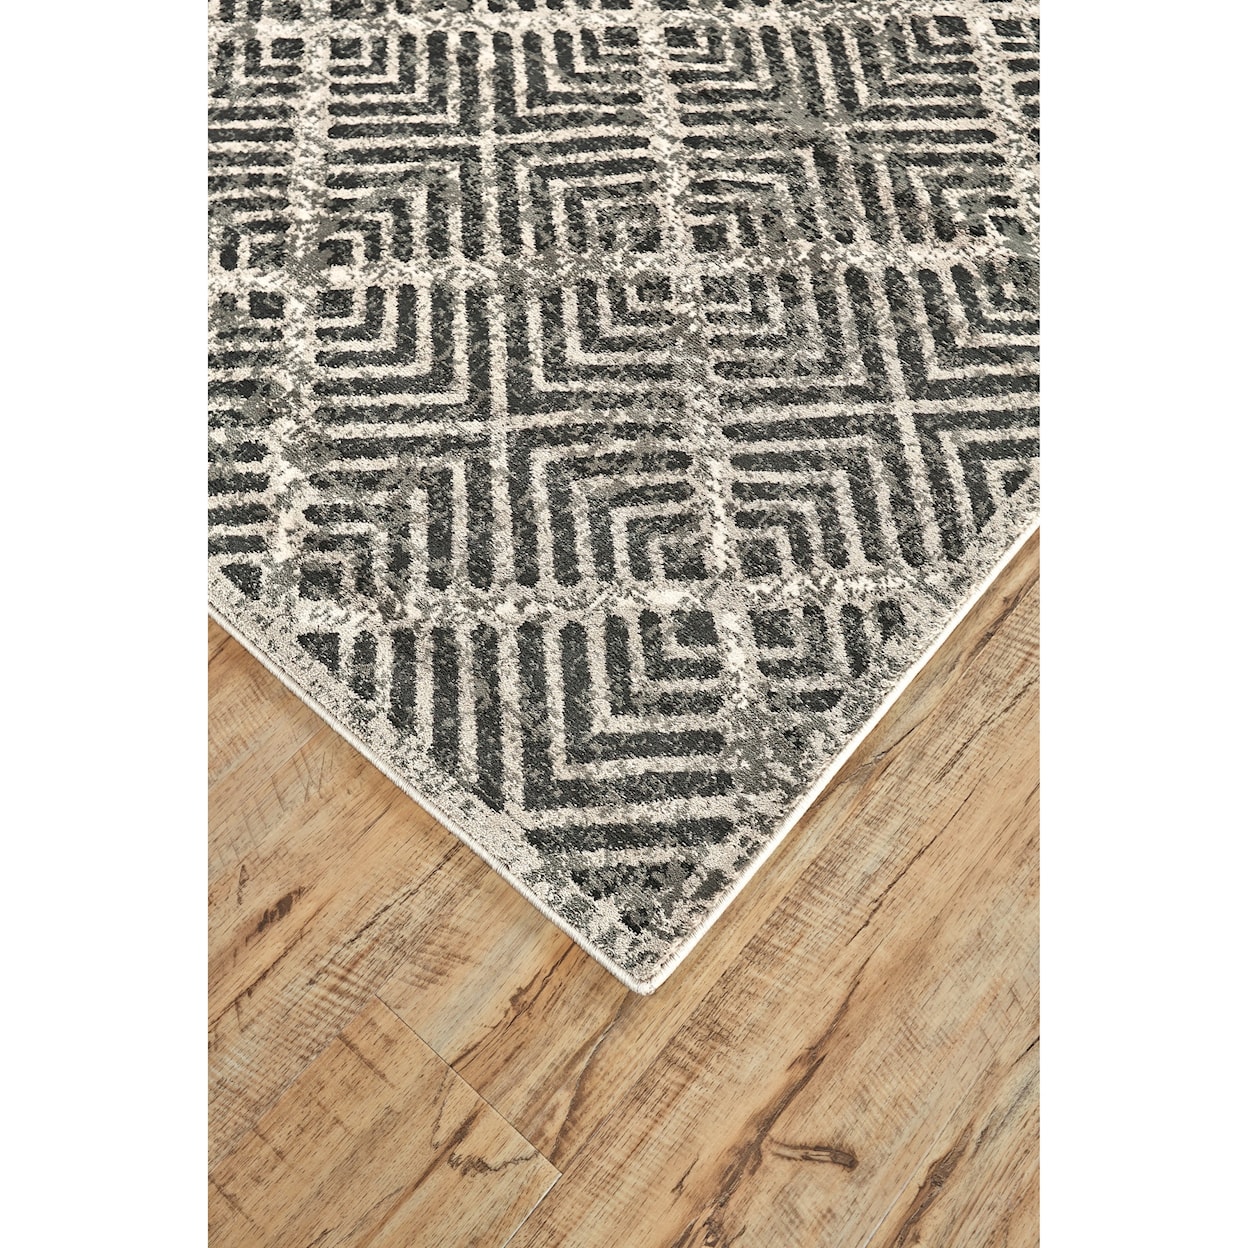 Feizy Rugs Katari Castle/Taupe 8' x 8' Round Area Rug